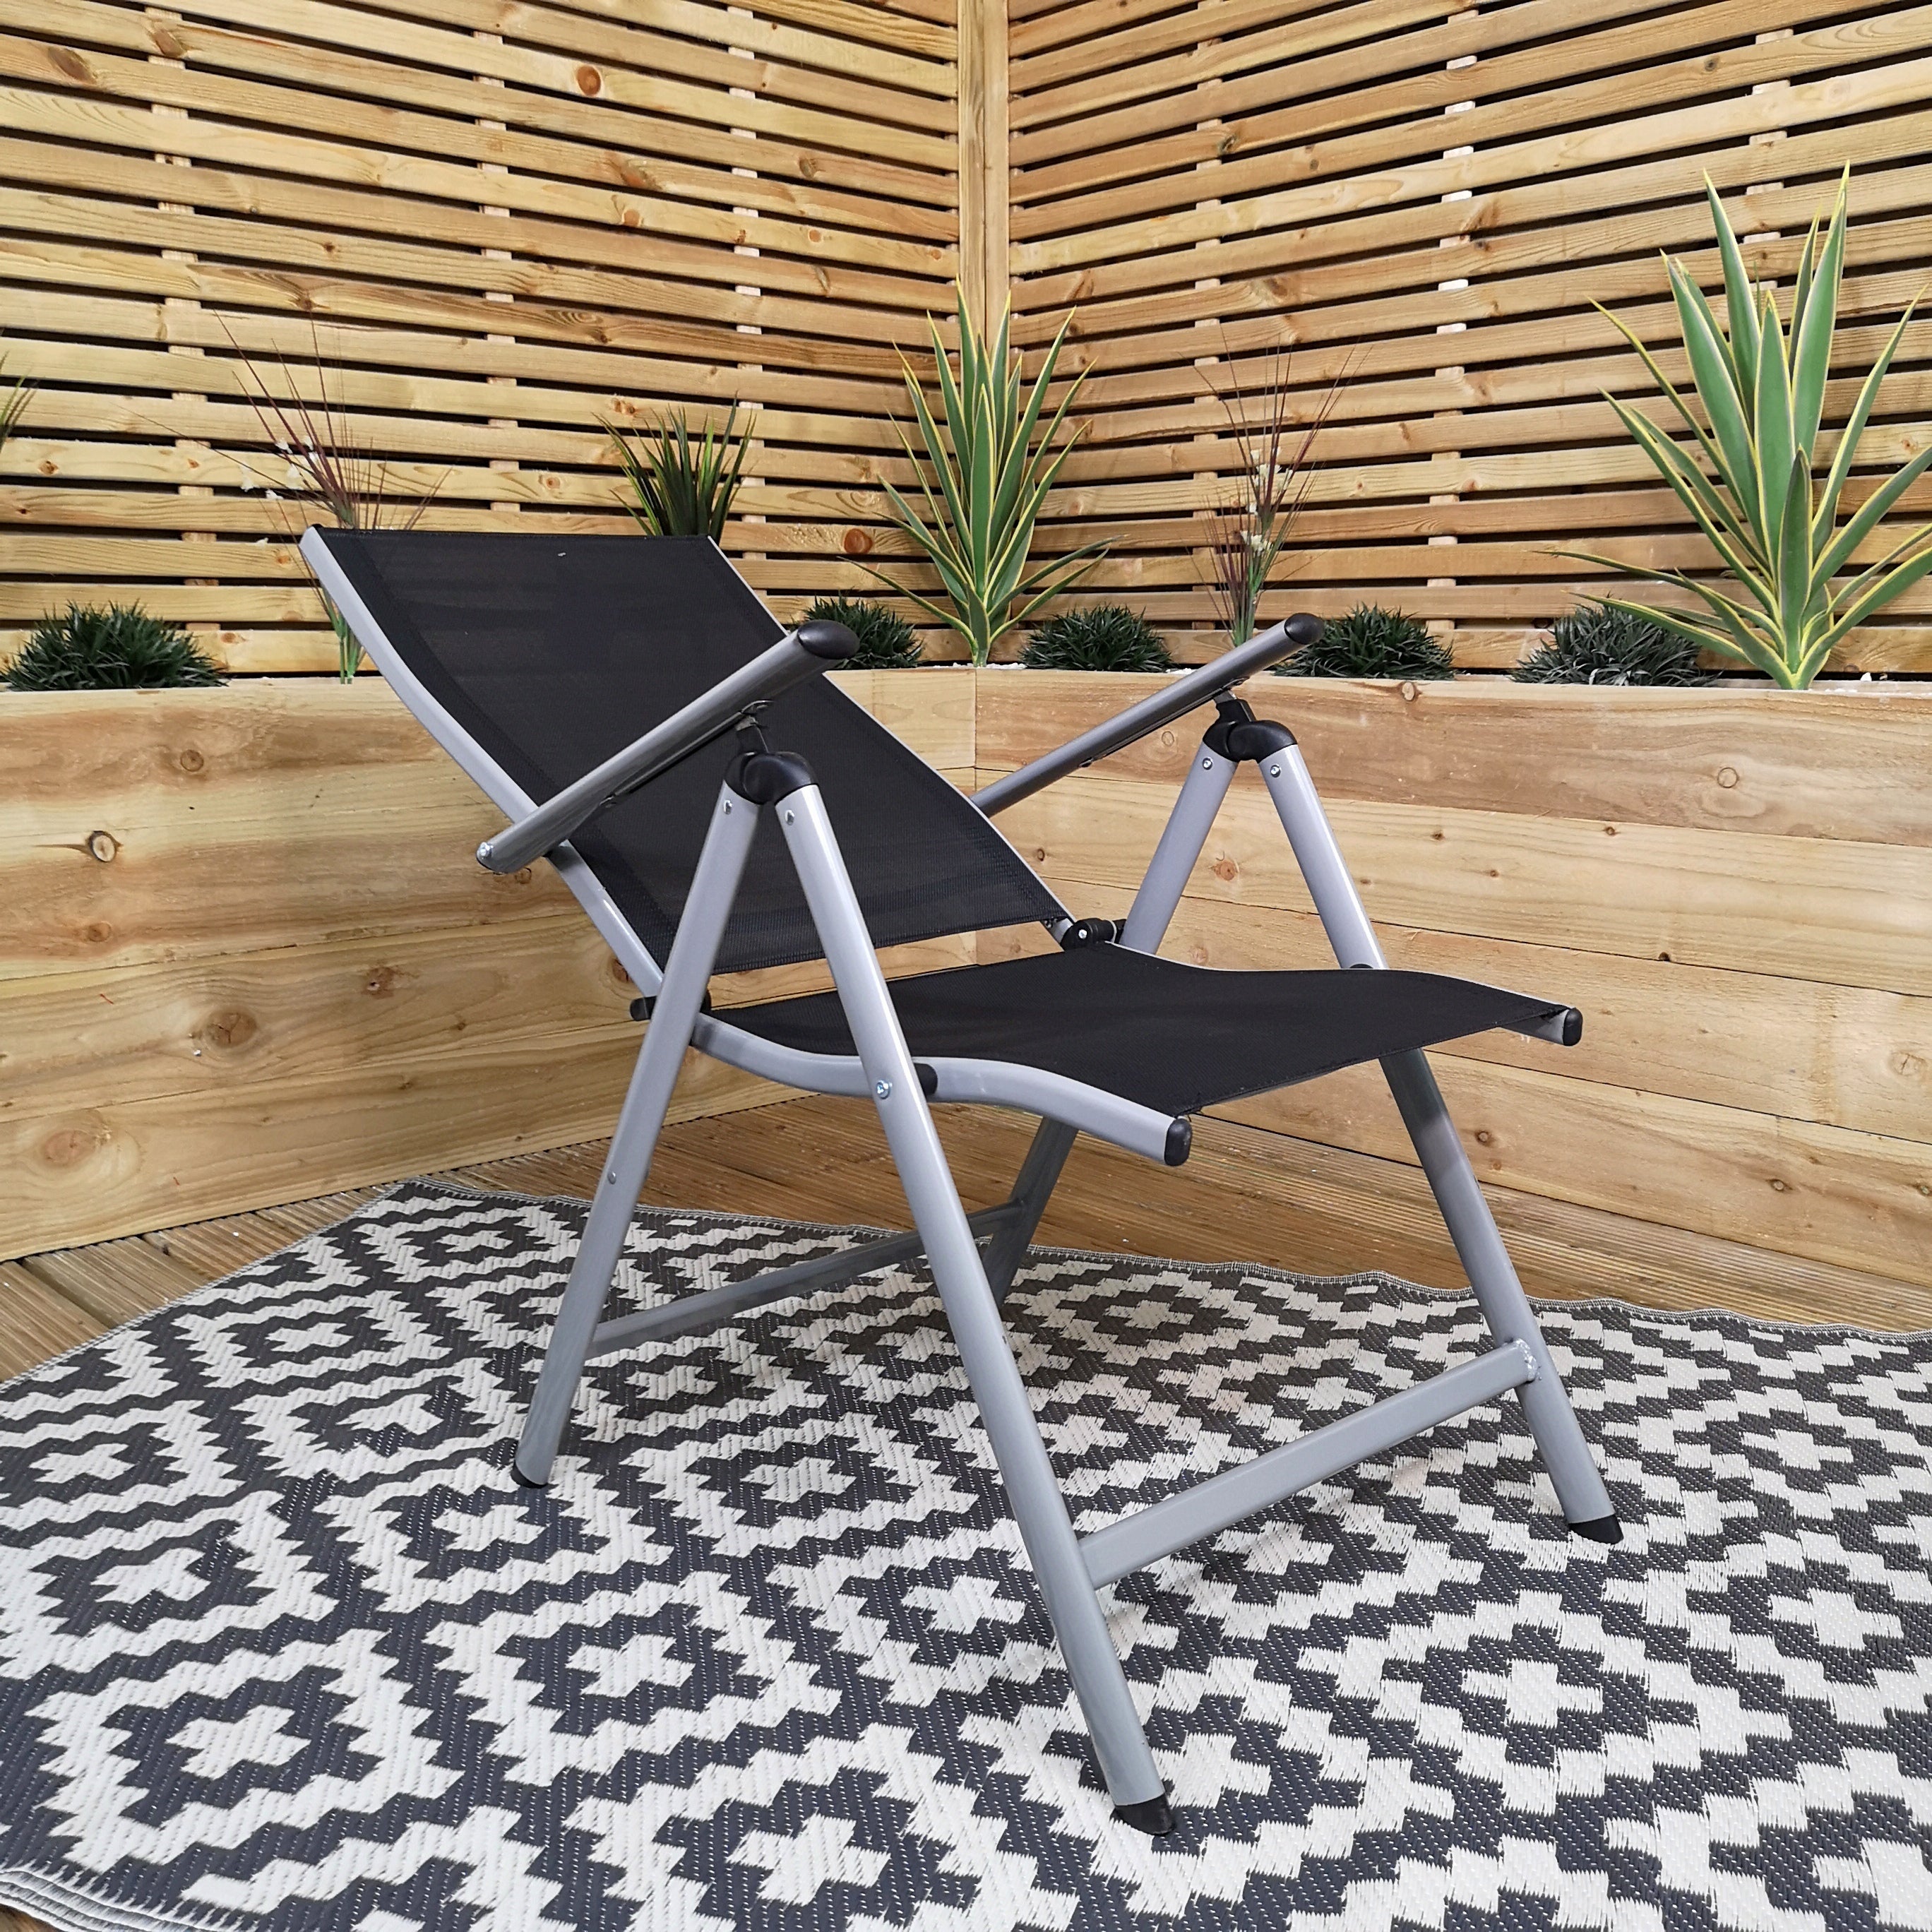 Outdoor Garden Patio Multi Position Reclining Folding Chair in Black and Silver